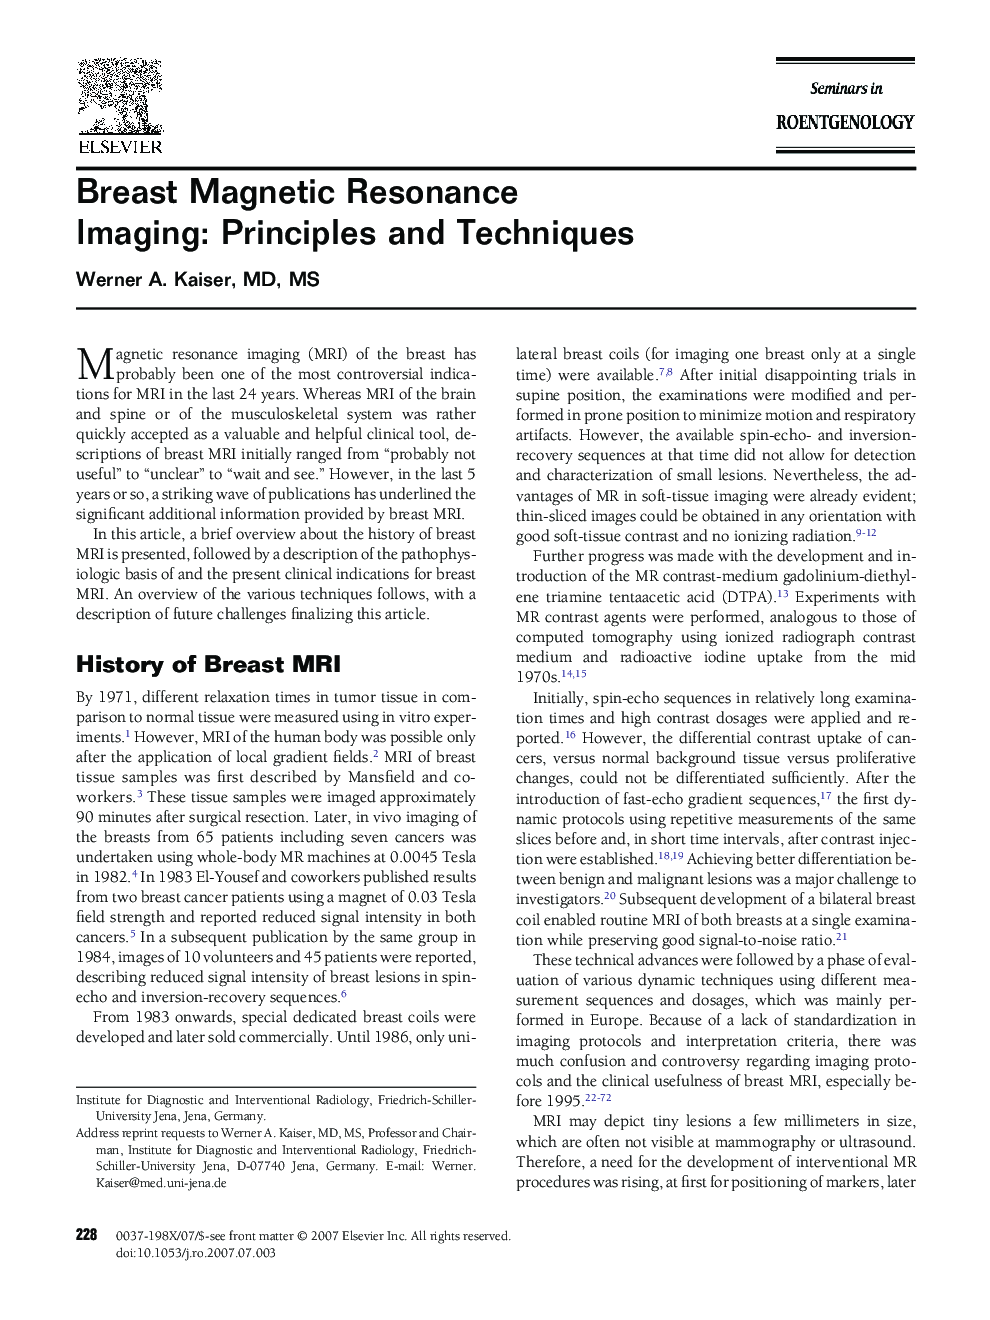 Breast Magnetic Resonance Imaging: Principles and Techniques